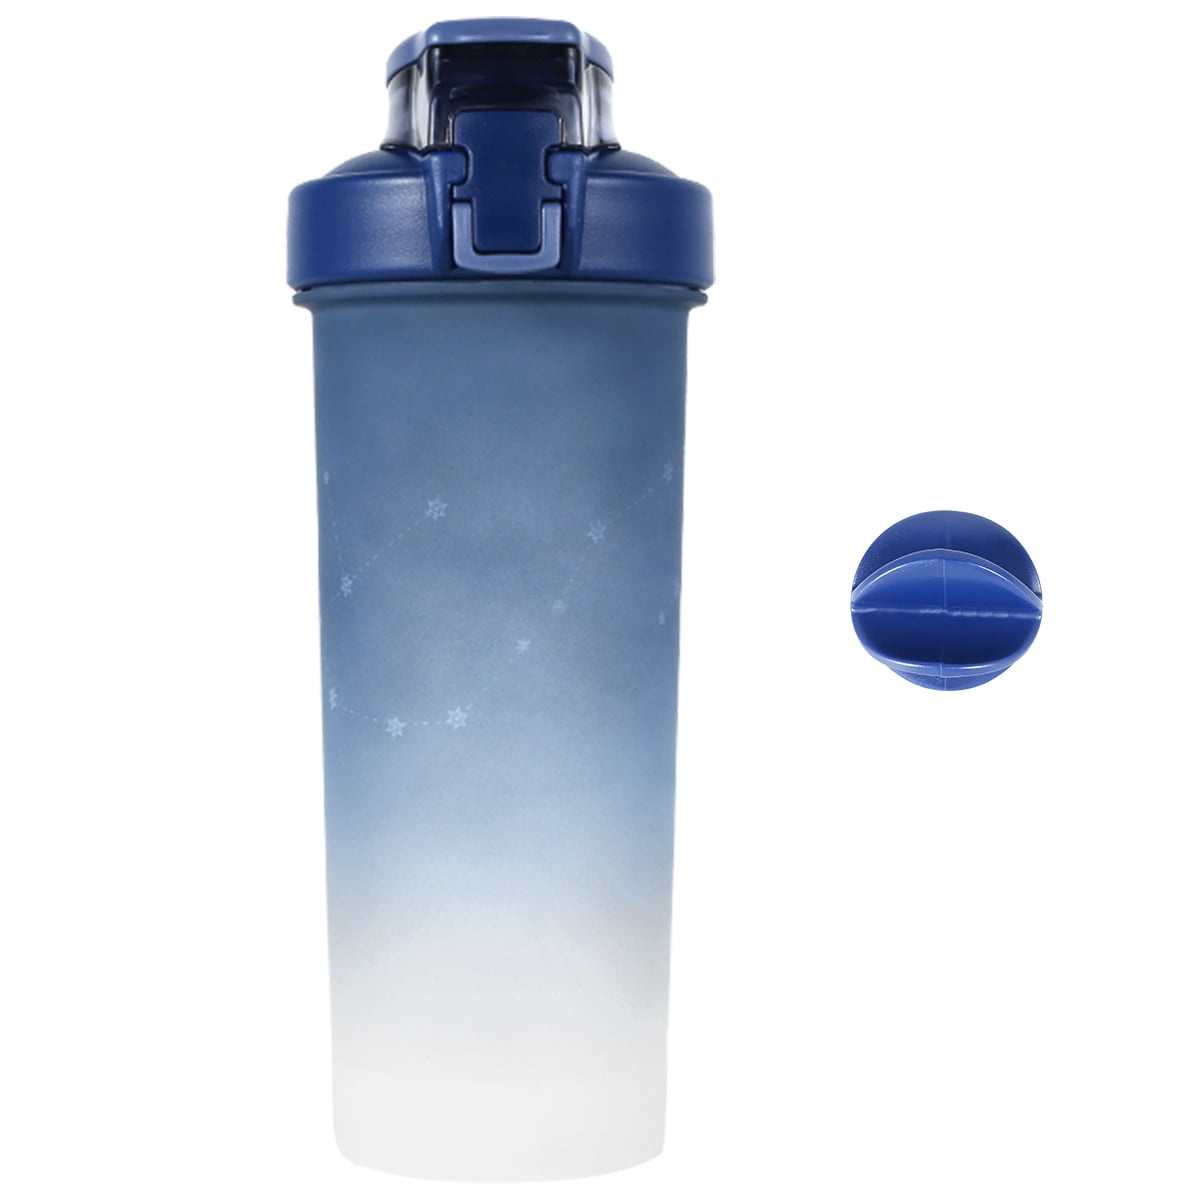 Pcapzz 800ml Shaker Bottle,Plastic and Silicone Shaker Cup with Built-in  Stirring Ball Shaker Mixer Cup for Protein Shakes and Pre Workout